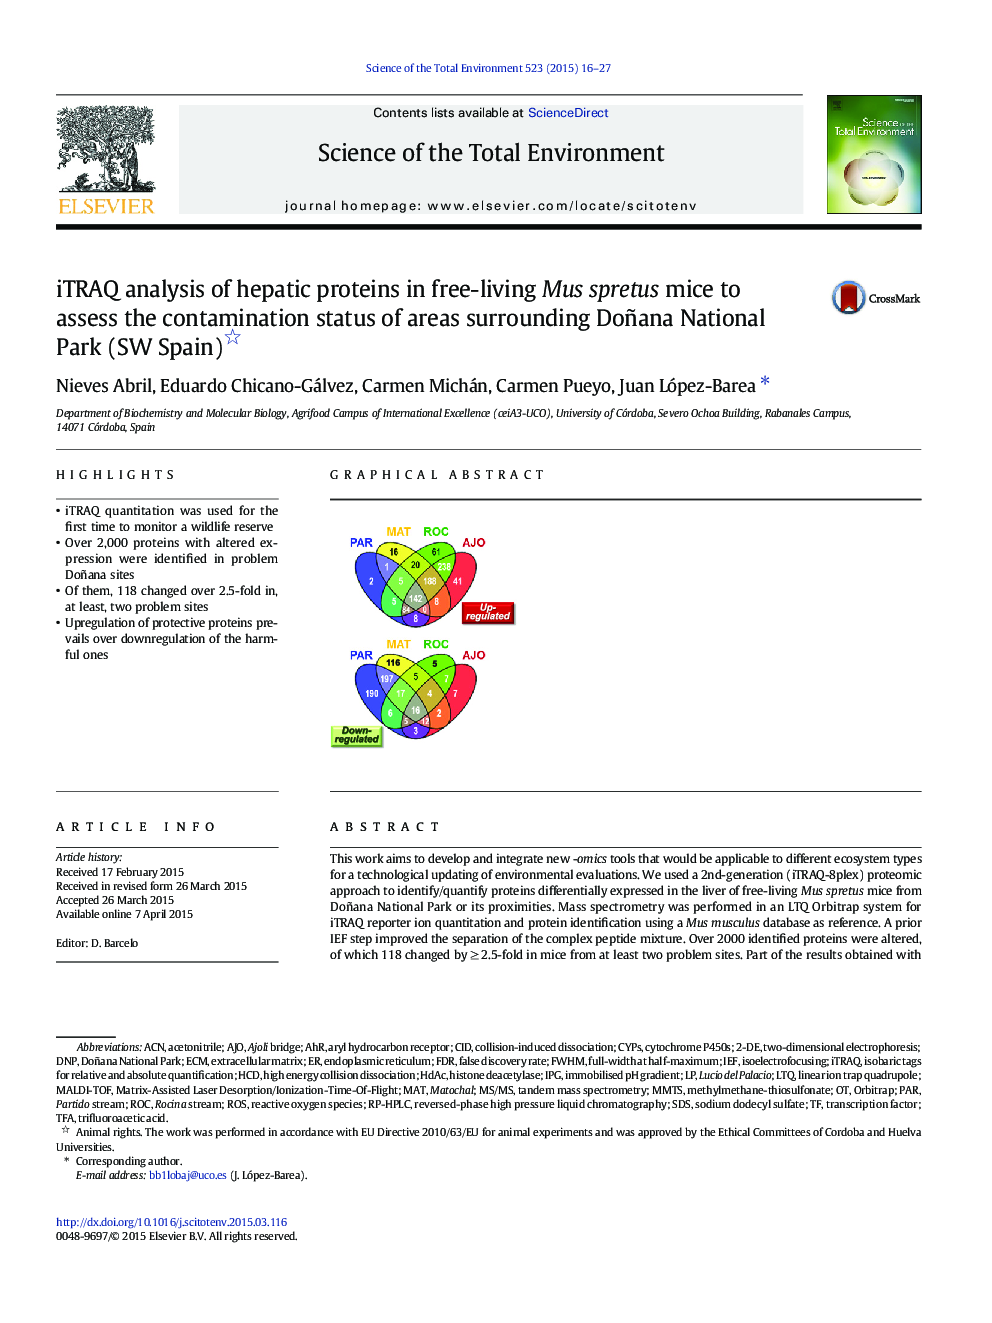 iTRAQ analysis of hepatic proteins in free-living Mus spretus mice to assess the contamination status of areas surrounding Doñana National Park (SW Spain) 